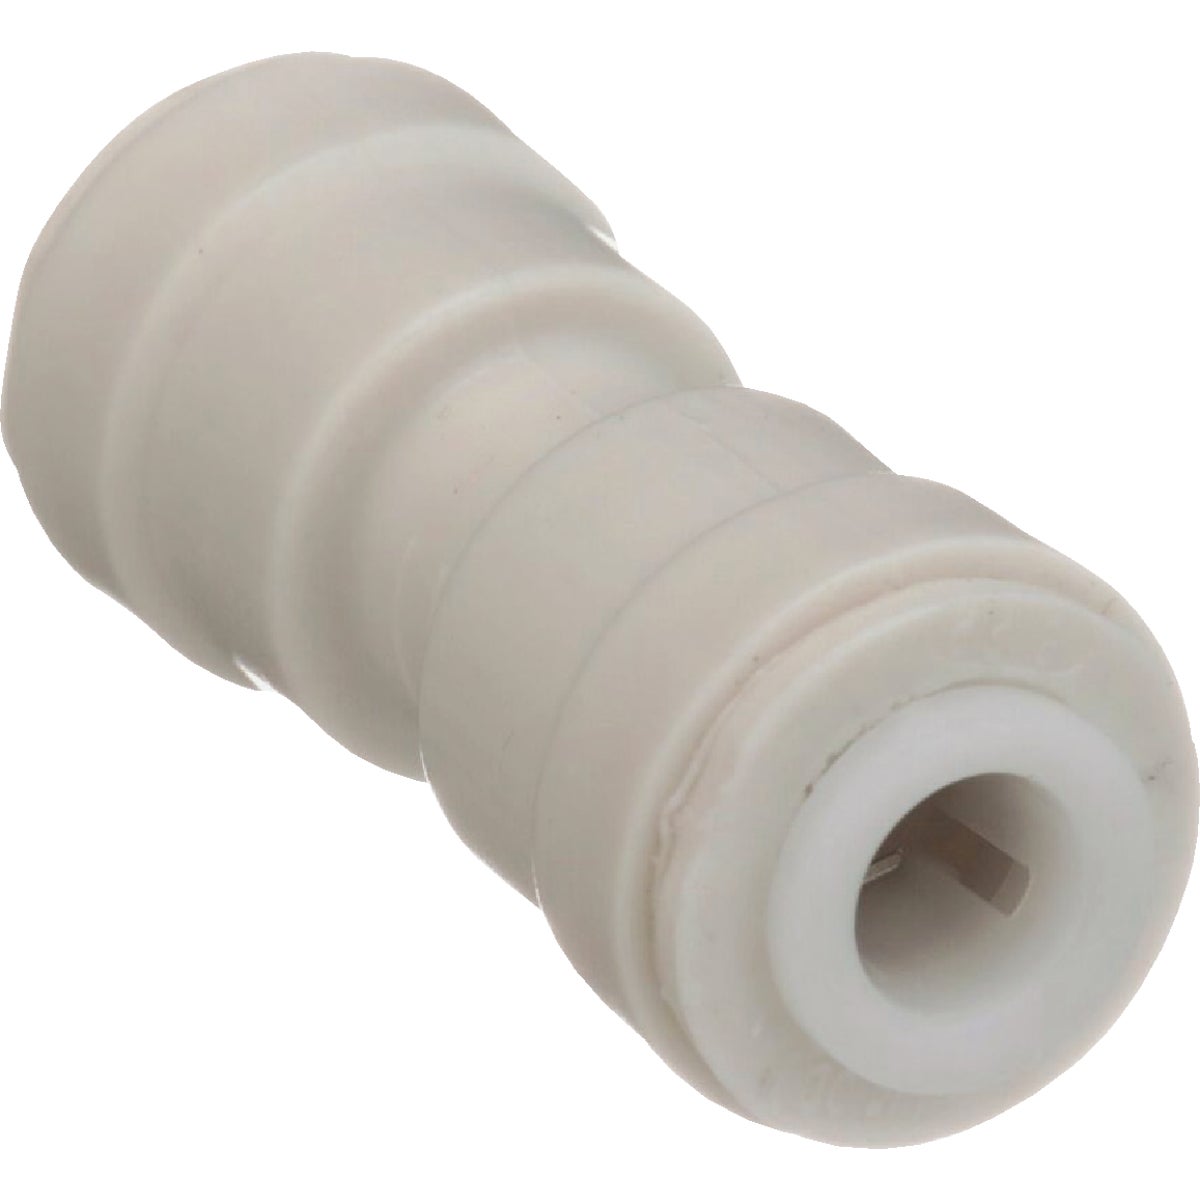 Watts Aqualock 1/2 In. x 1/2 In. Push-to-Connect Plastic Coupling